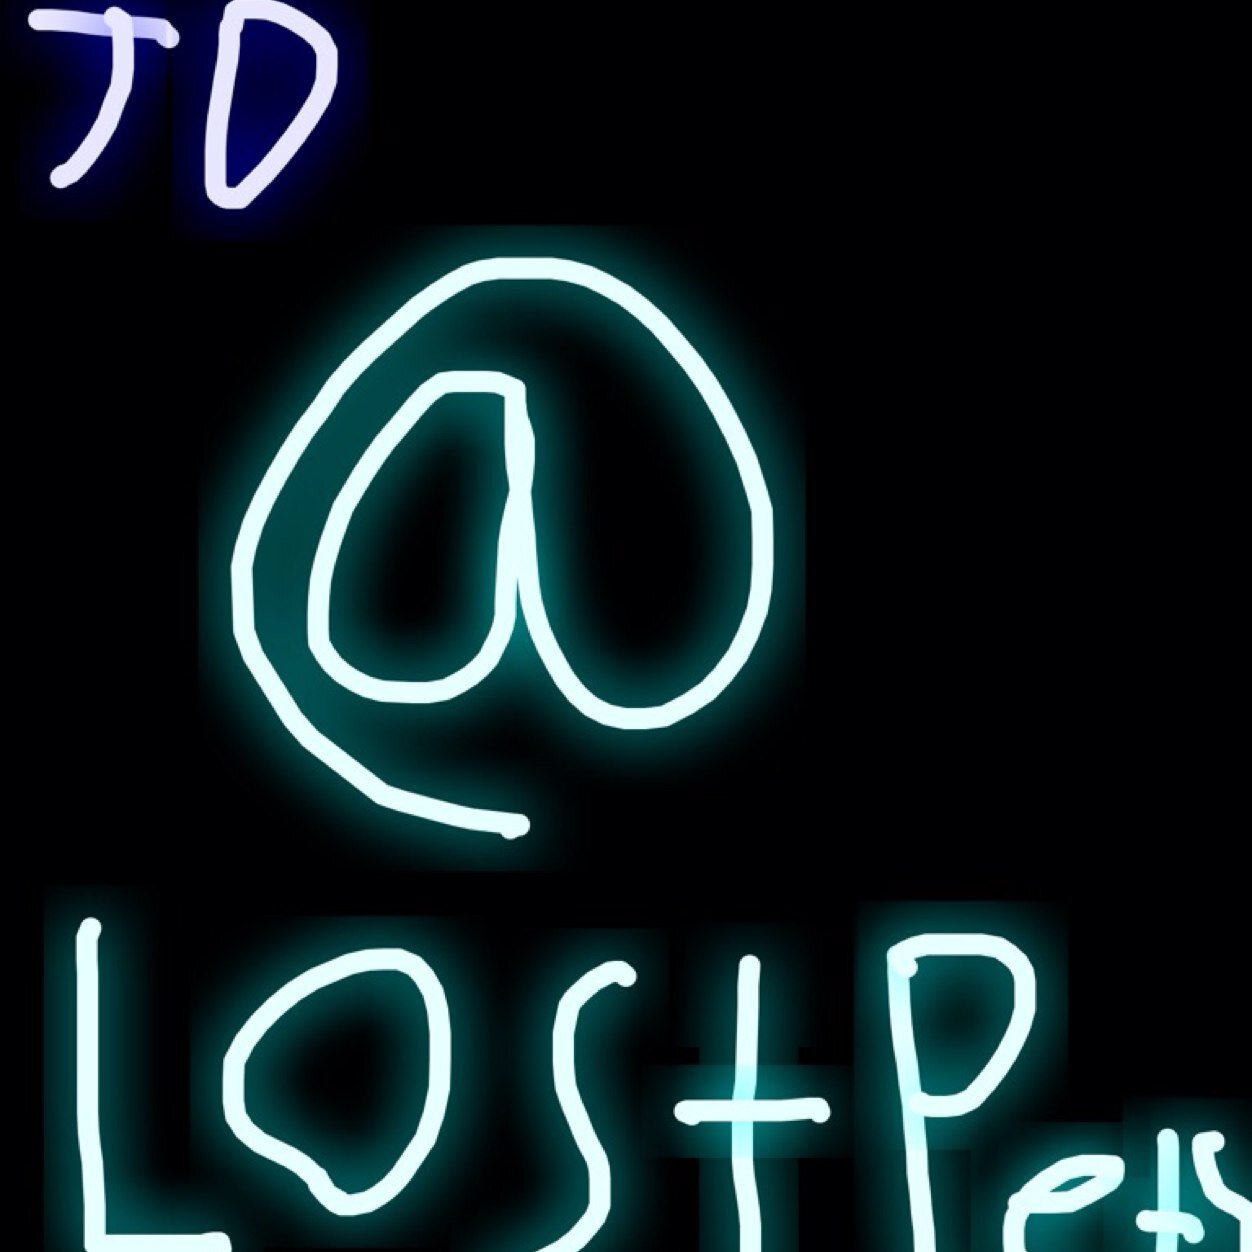 @lostpets is created by JD (not the t account)

It is under development